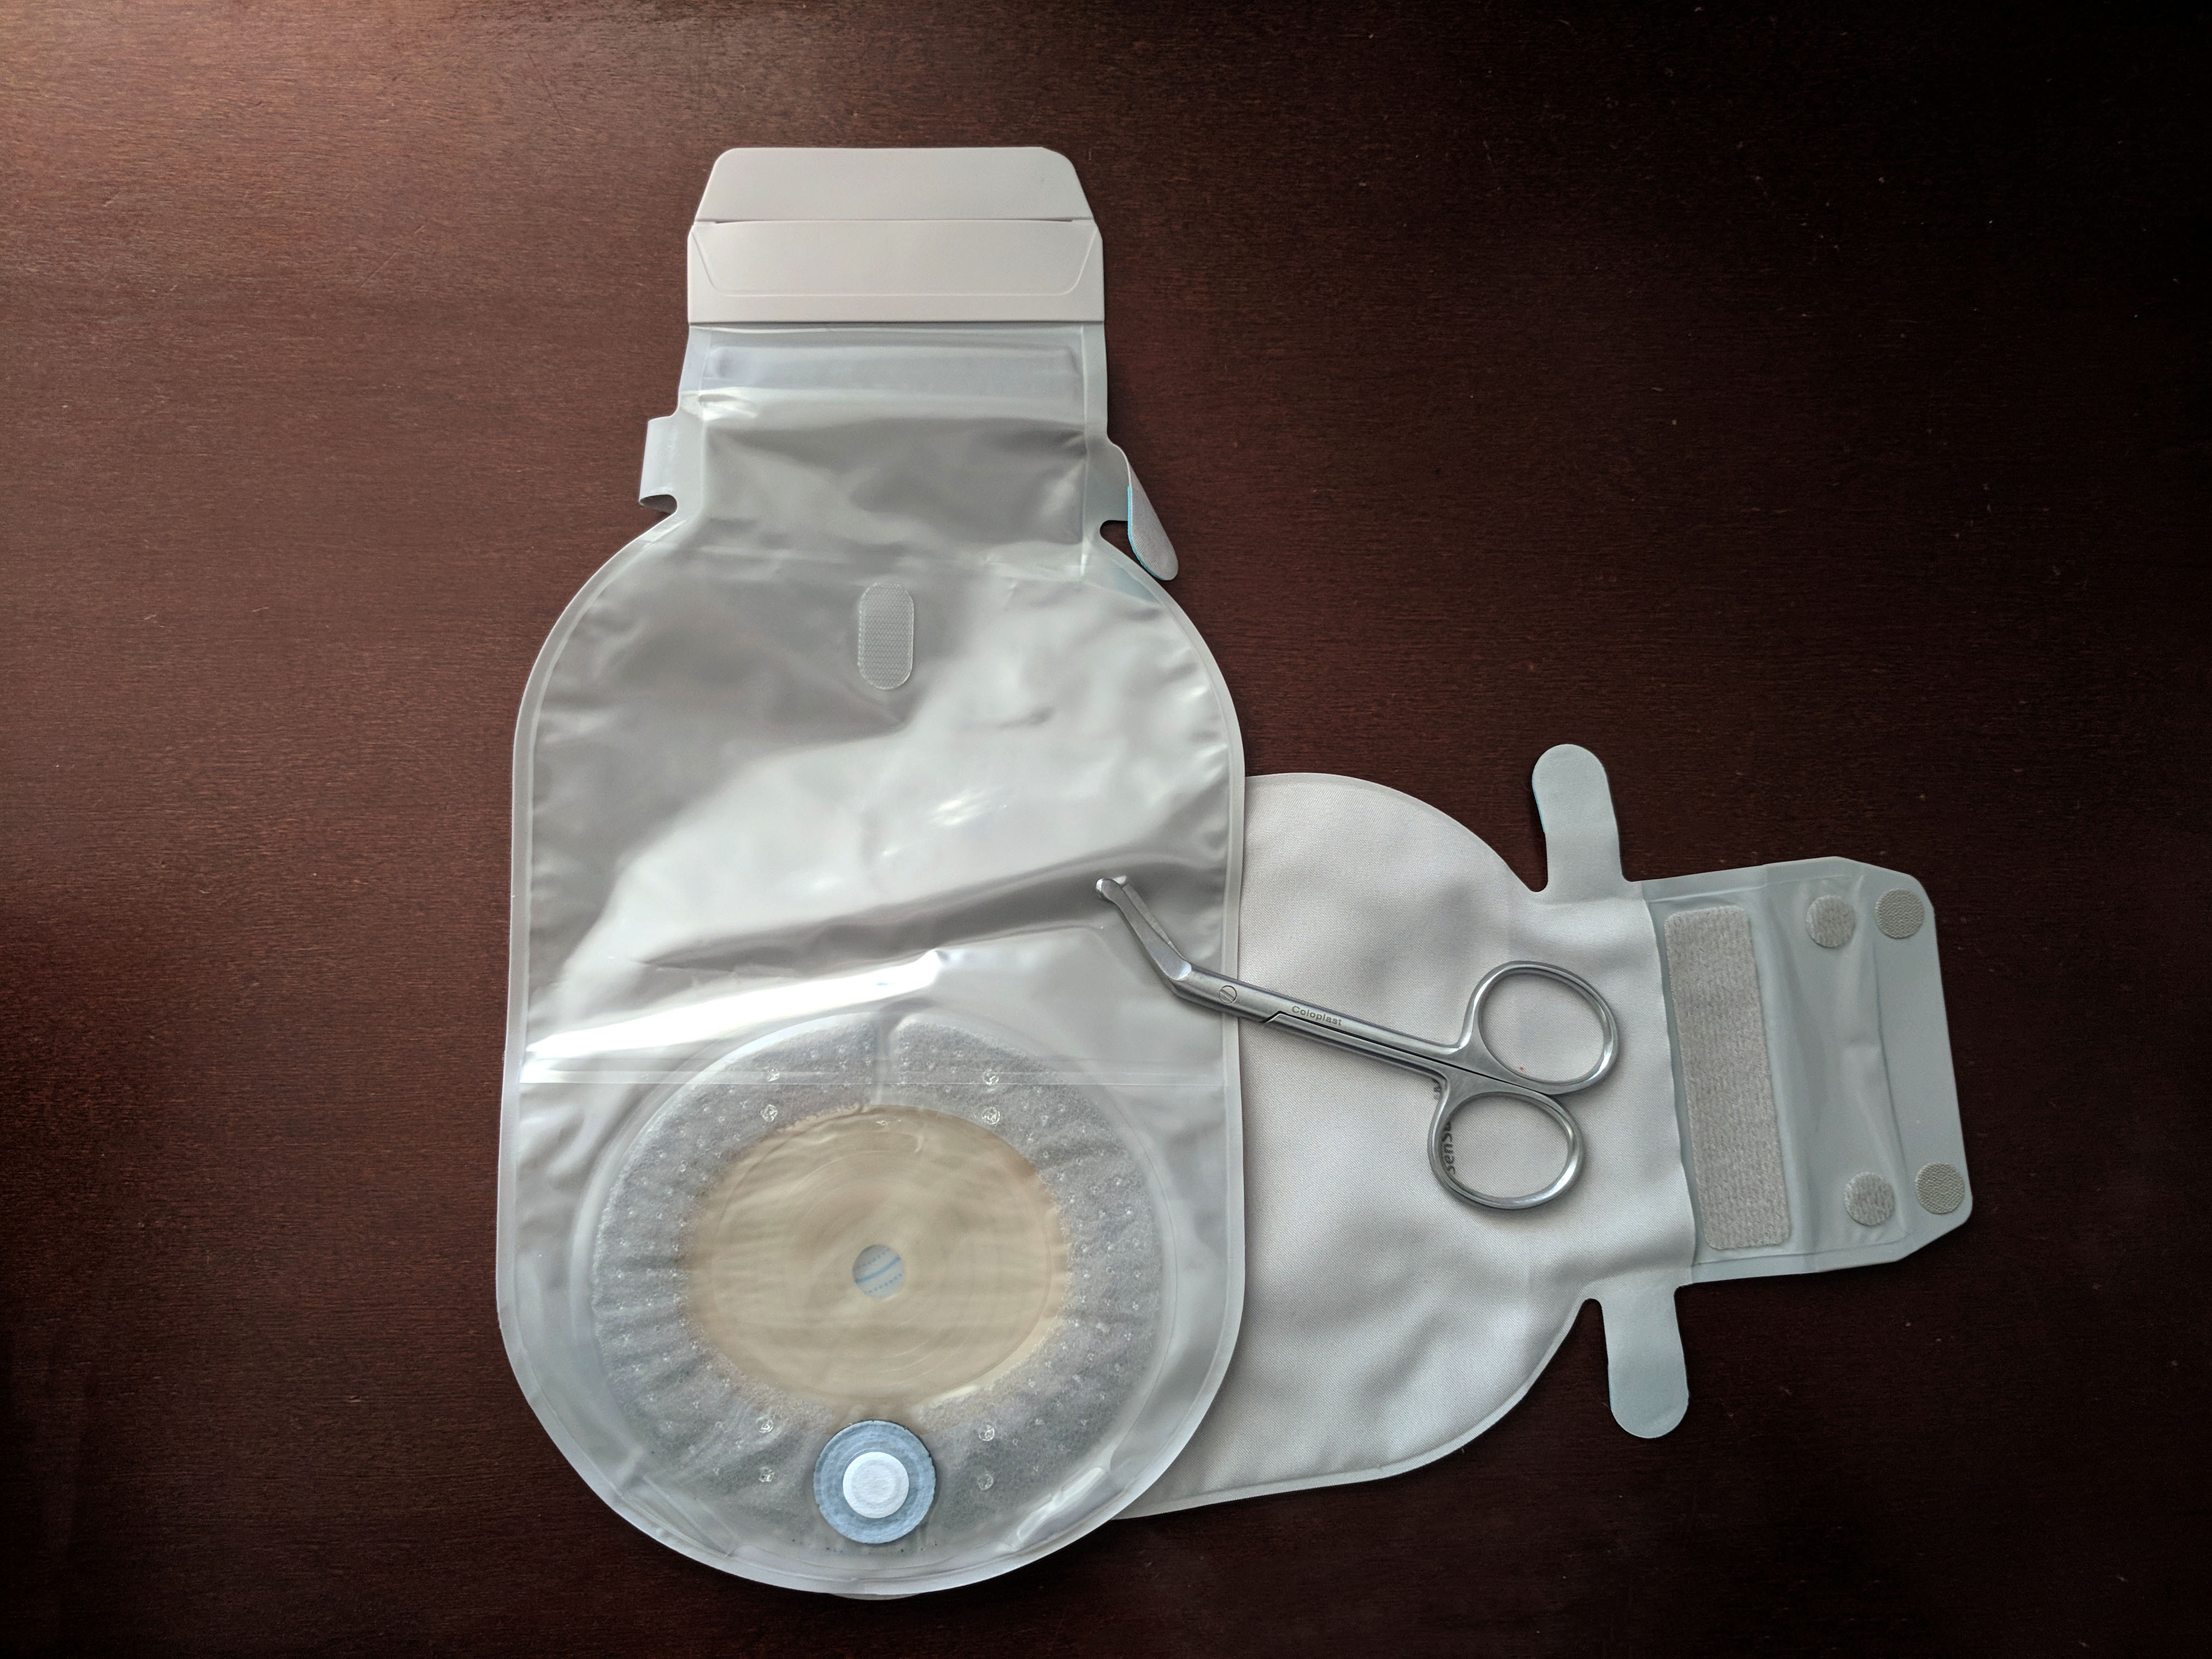 Coloplast 8002 CHILD COLOSTOMY BAG Hydrocolloid Medical Dressing Price in  India - Buy Coloplast 8002 CHILD COLOSTOMY BAG Hydrocolloid Medical  Dressing online at Flipkart.com